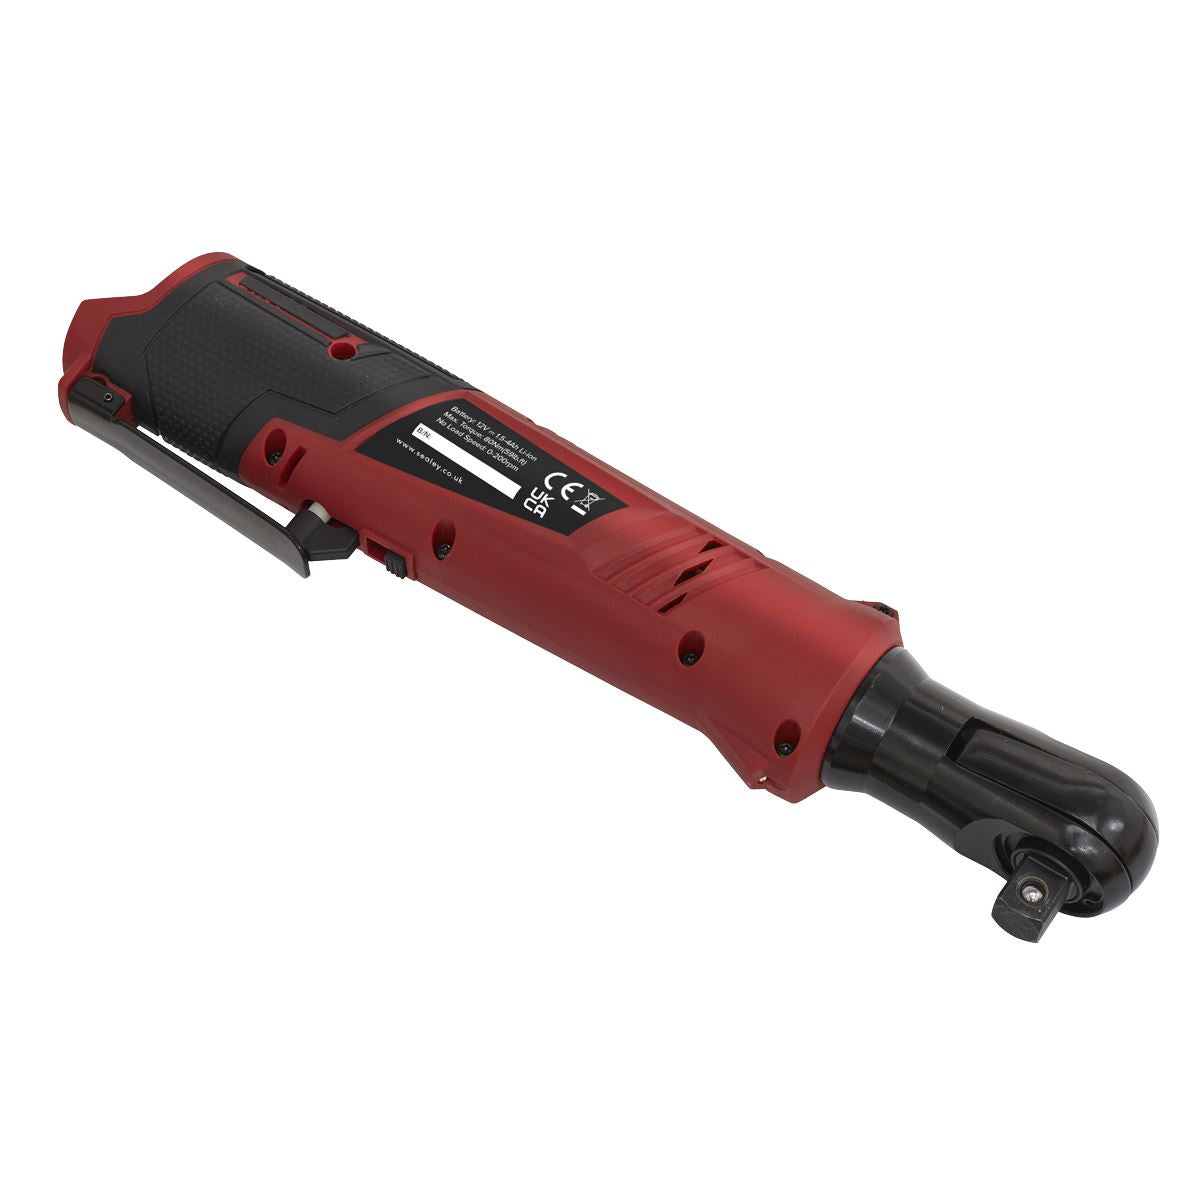 Sealey Cordless Ratchet Wrench 1/2"Sq Drive 12V SV12 Series - Body Only